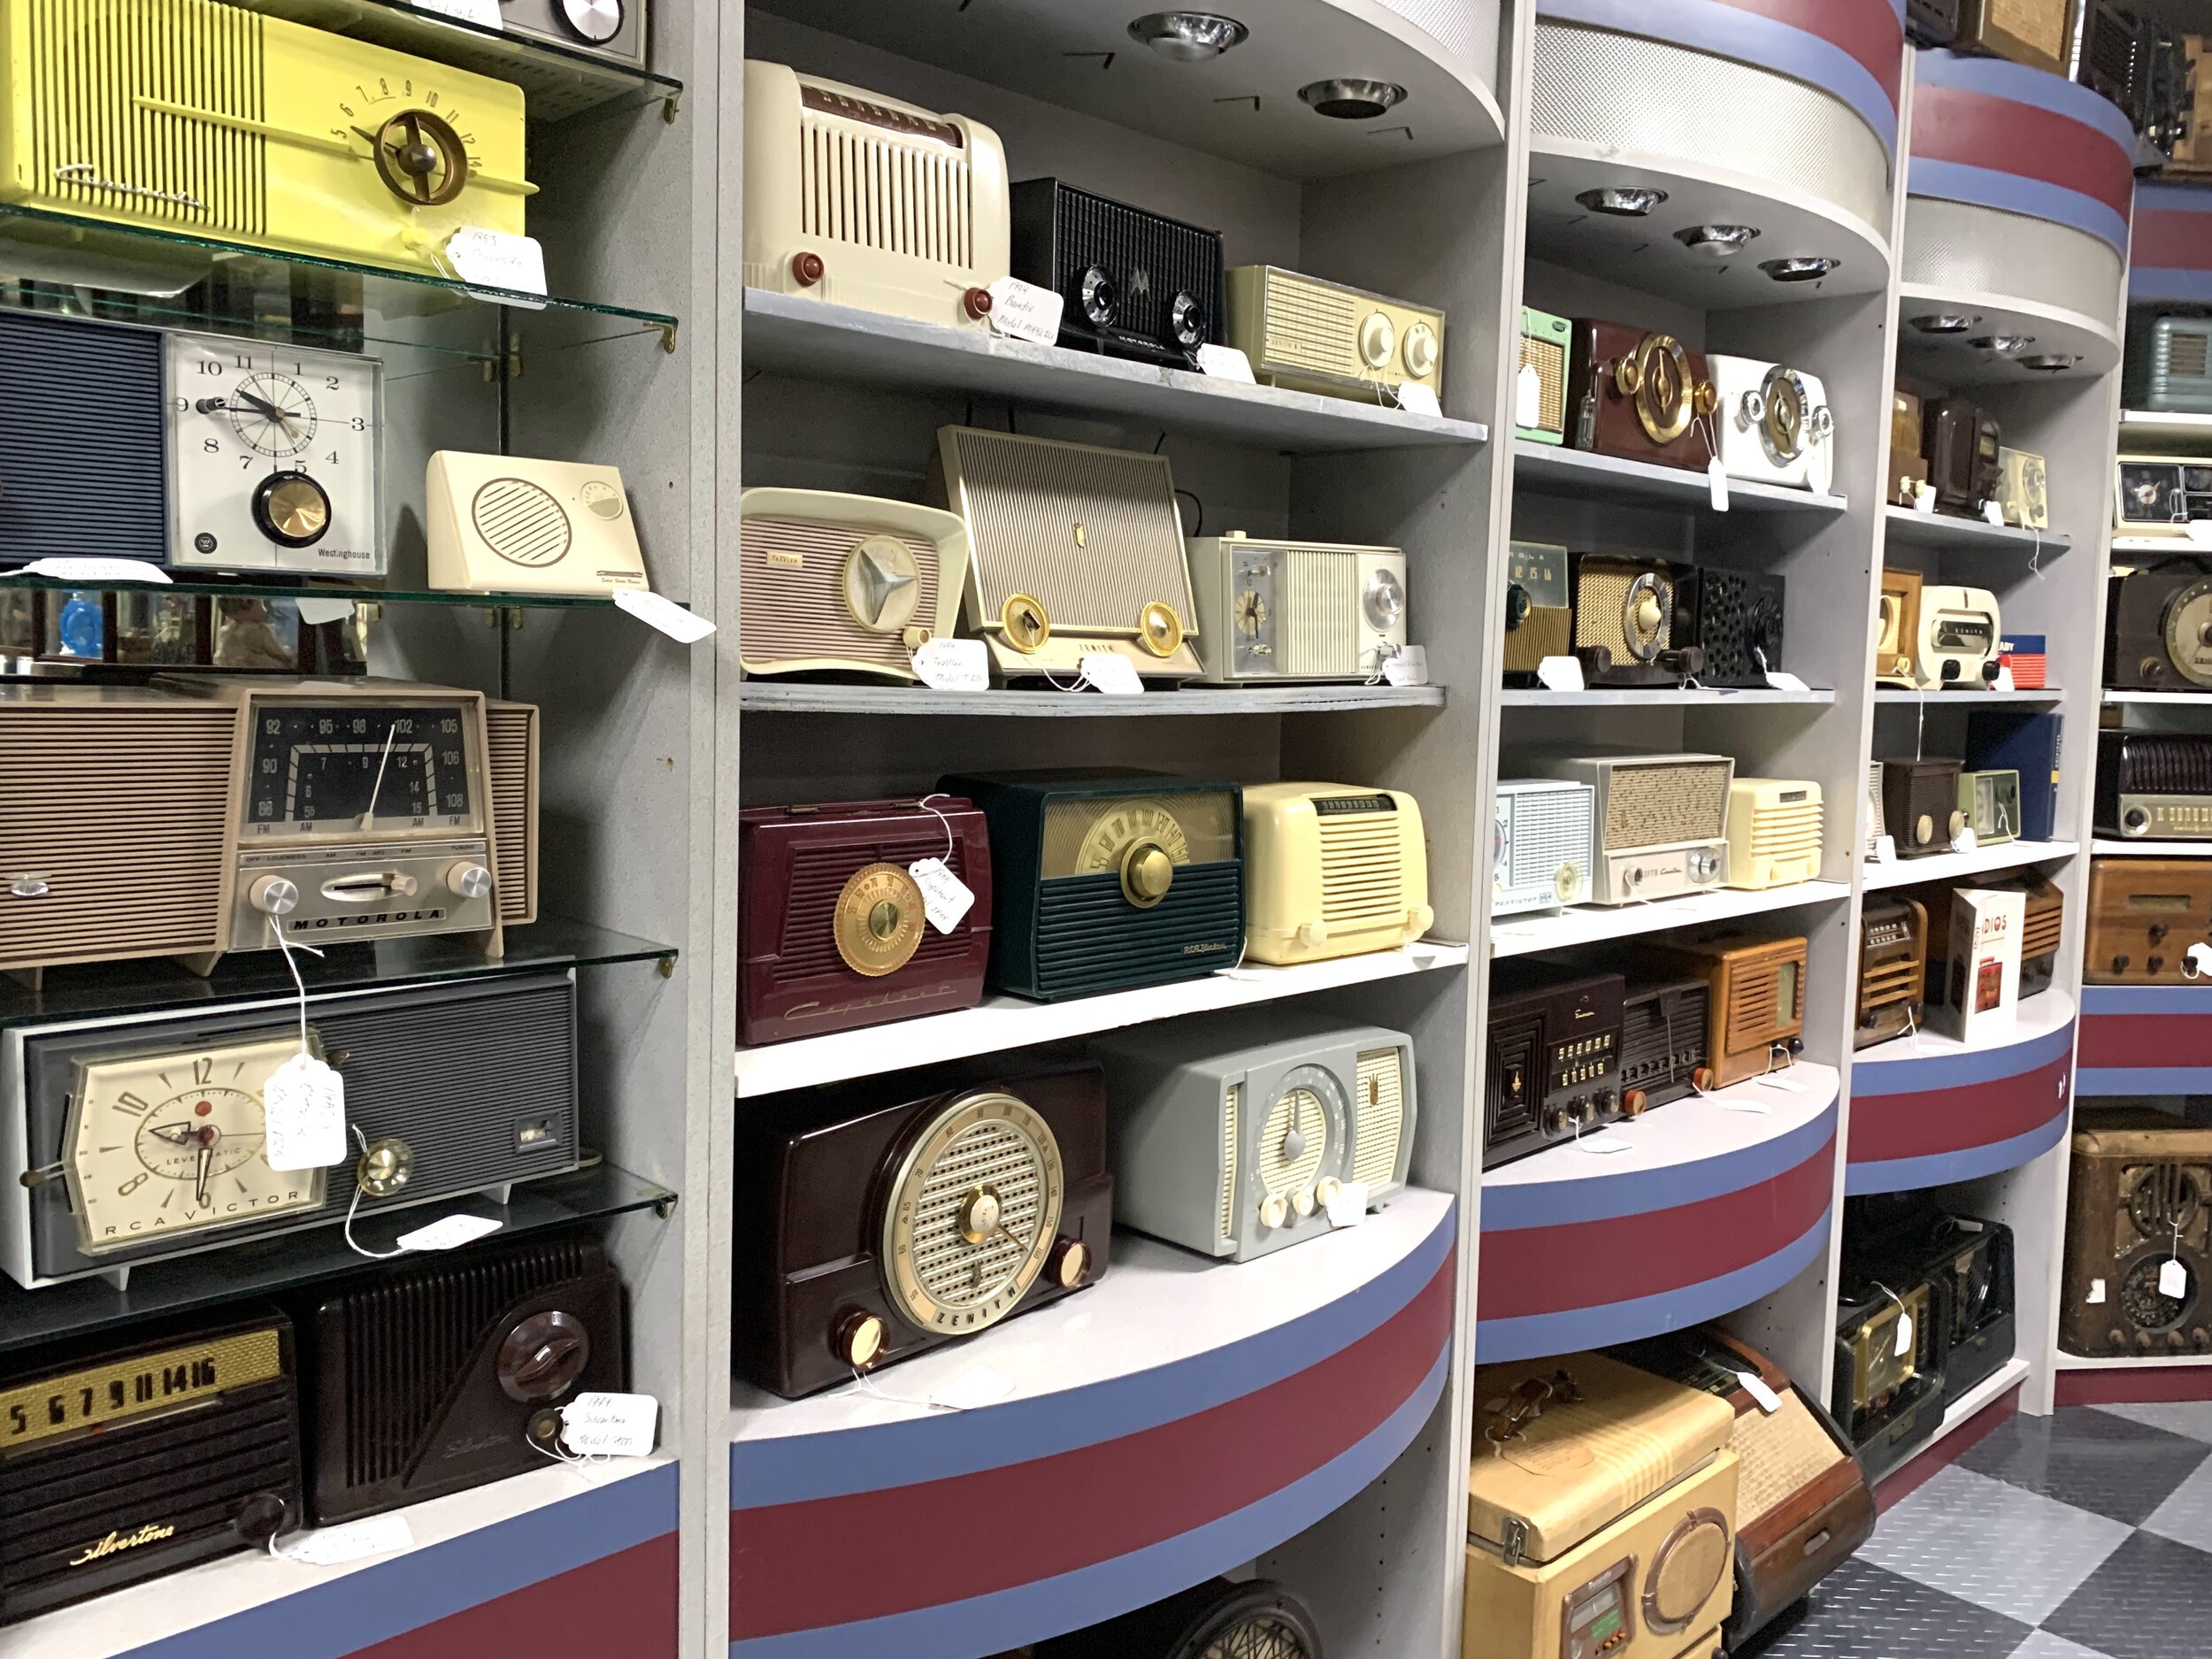  Part of the radio collection.  